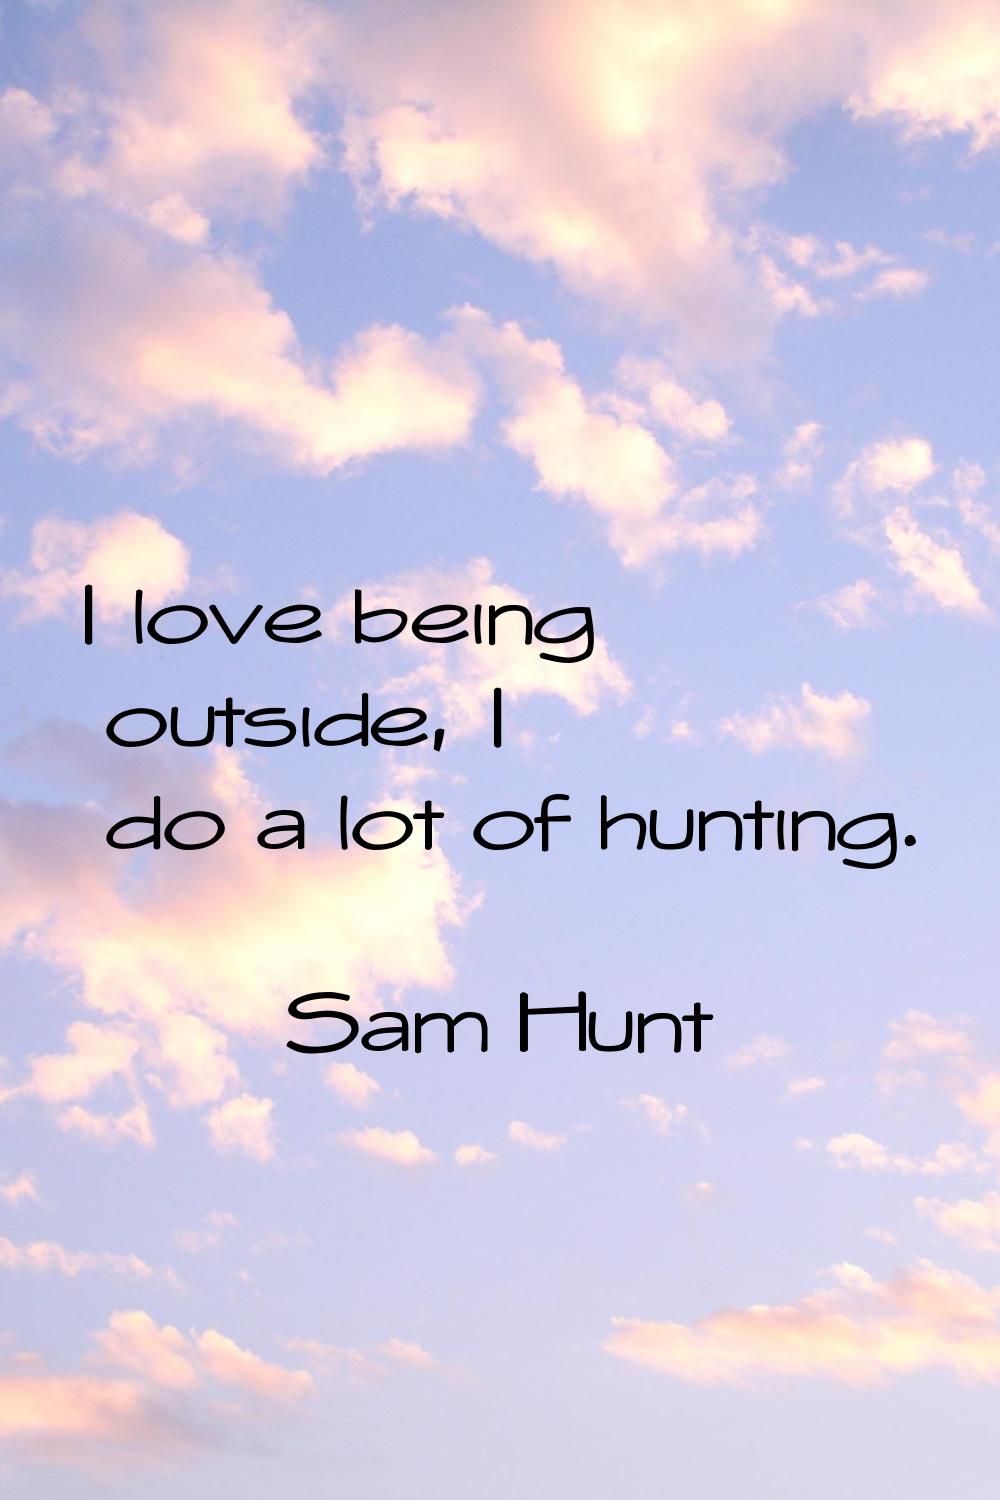 I love being outside, I do a lot of hunting.